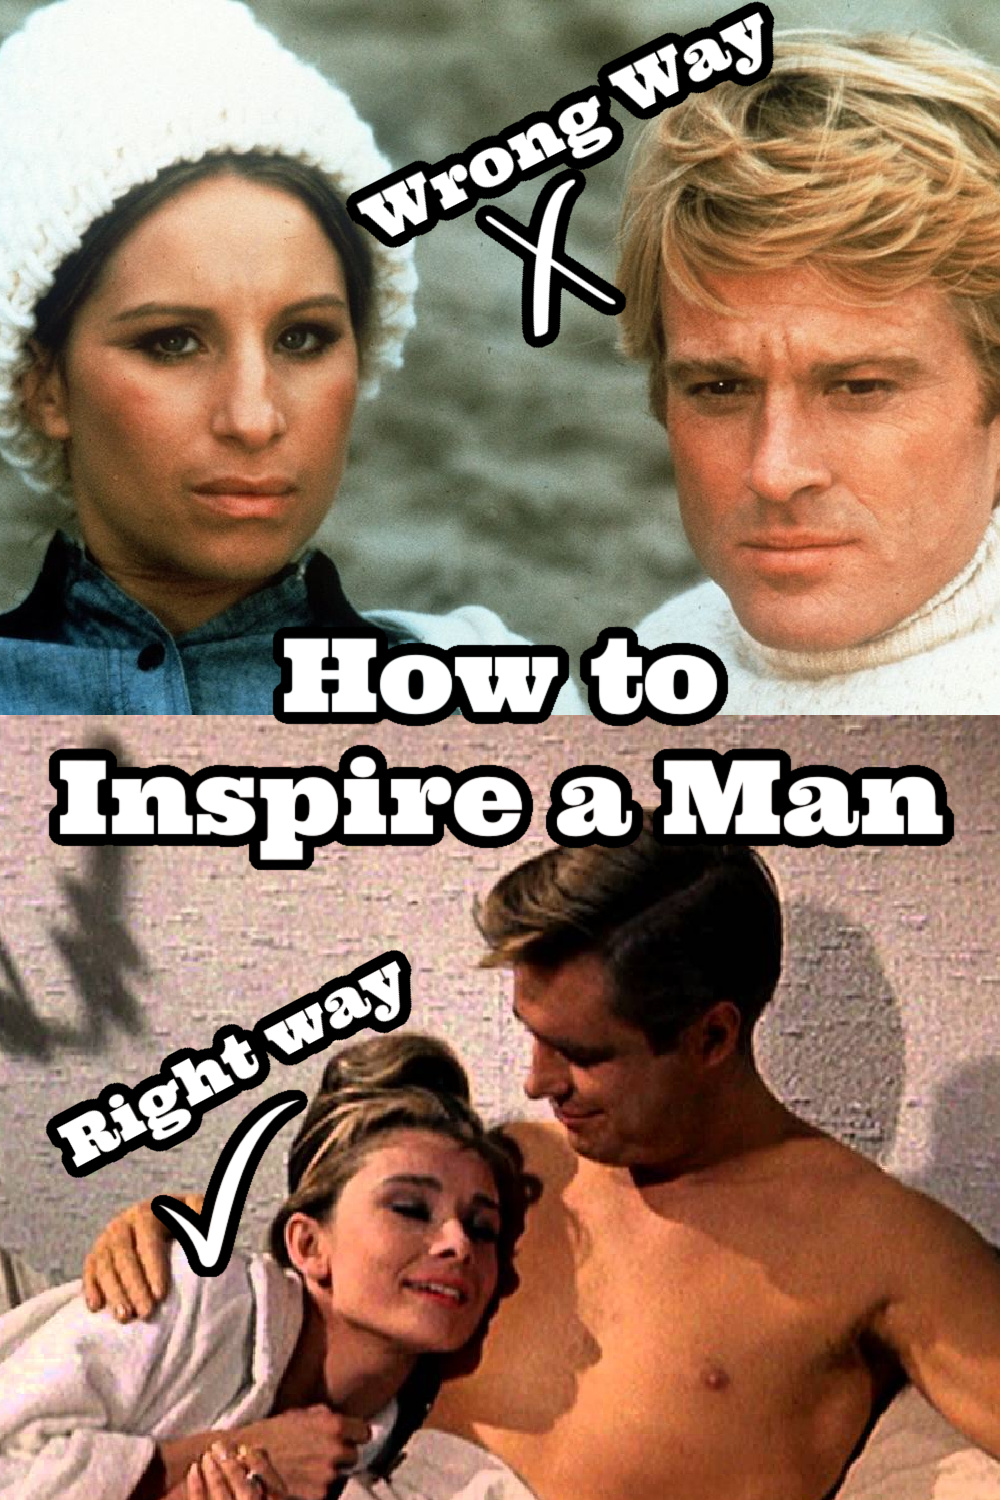 how to inspire a man to be a better man, how women inspire men, how to inspire a man, feminine testing the masculine, how the feminine tests the masculine, feminine testing, feminine testing vs nagging, wounded masculine energy in a female, wounded masculine energy in a woman, wounded masculine energy, healthy feminine testing toxic testing, how women test men, breakfast at tiffanys movie analysis, masculine and feminine energy in film, how to gift a man with a challenge, how to get everything you want from him, how to use feminine energy to influence any man, different ways that women test men, call on his king energy, feminine and masculine energy in relationships, understanding masculine and feminine energy, sexual polarity in relationships, sexual polarity, sexual polarity masculine feminine, law of polarity in relationships, how to create polarity in relationships, masculine and feminine examples, Everyday starlet, sarah blodgett,